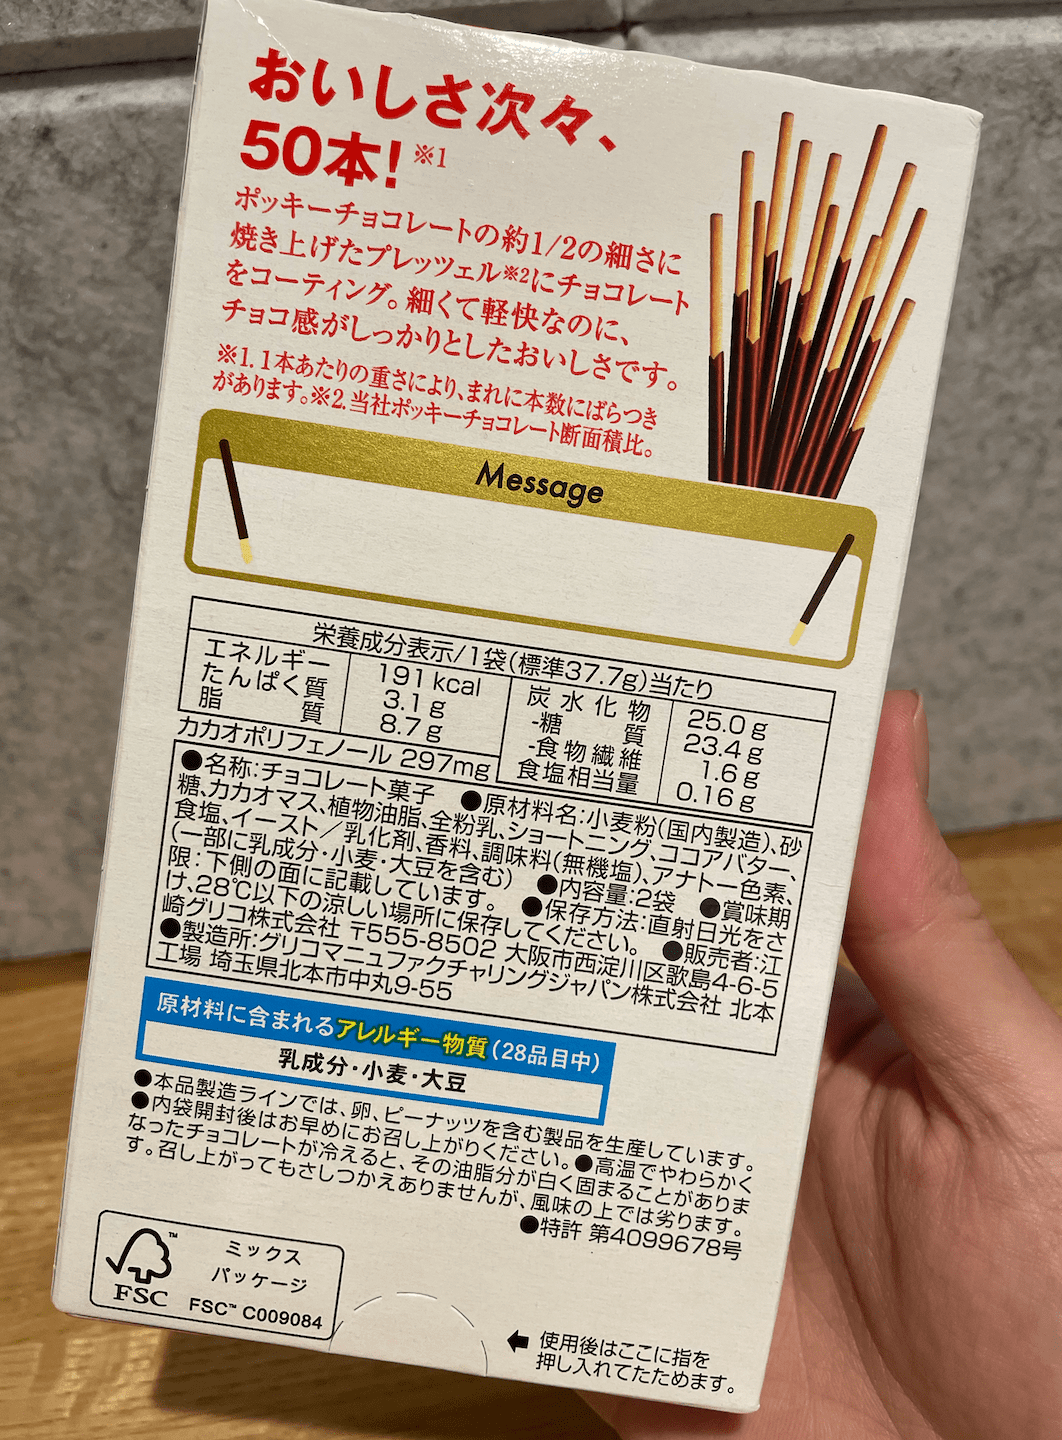 Actual product image of Pocky extra fine 2